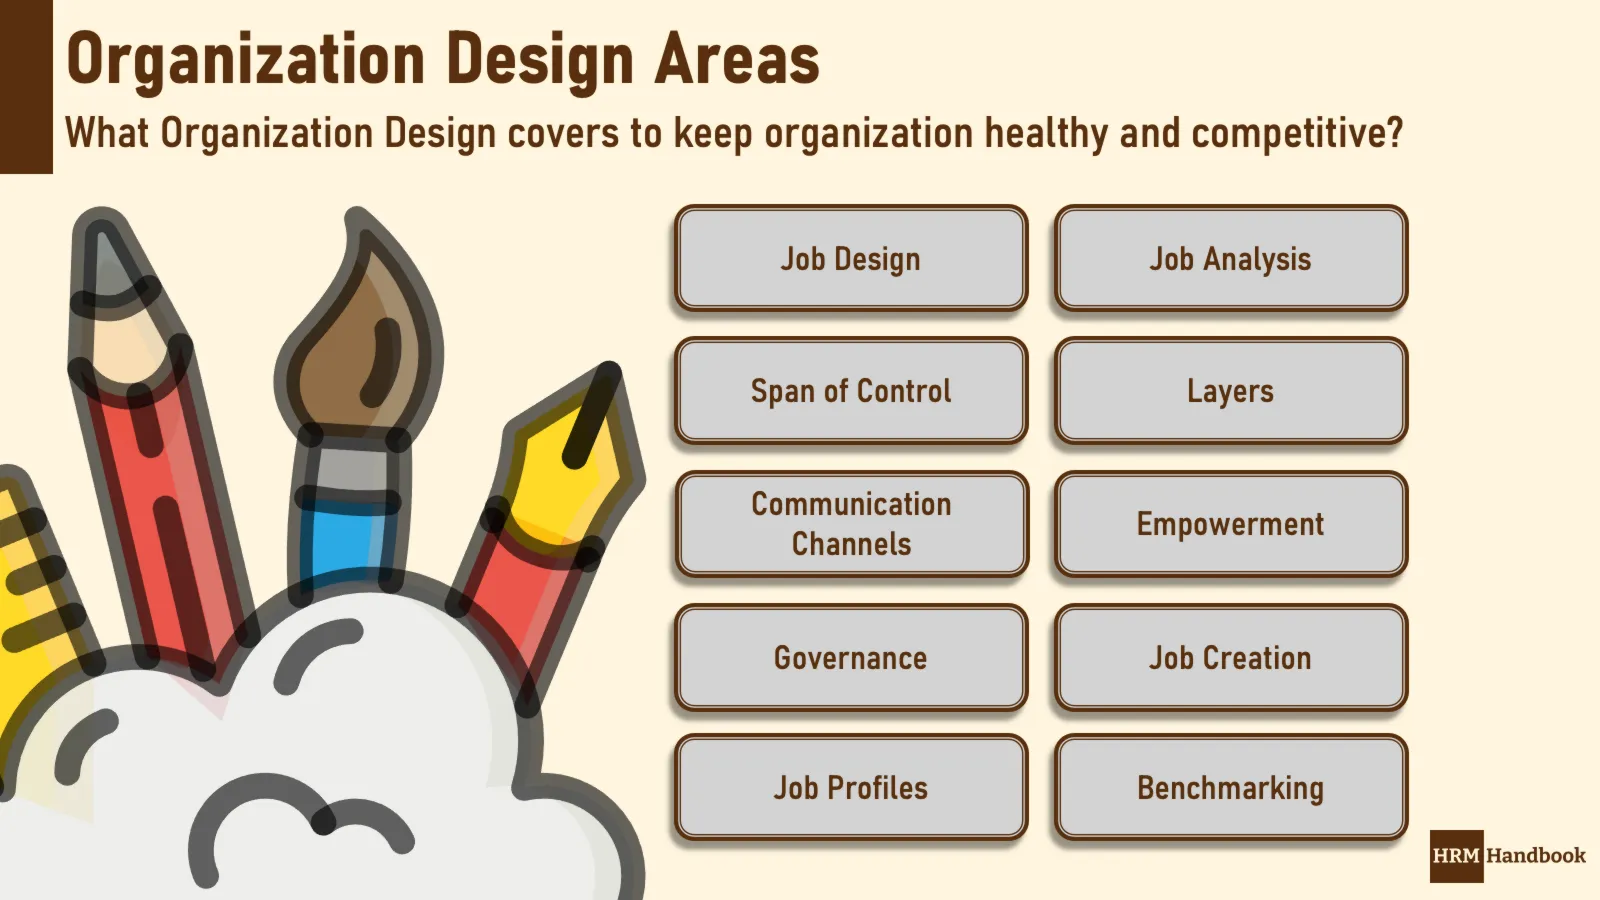 Organization Design, its roles, responsibilities and target areas in the business